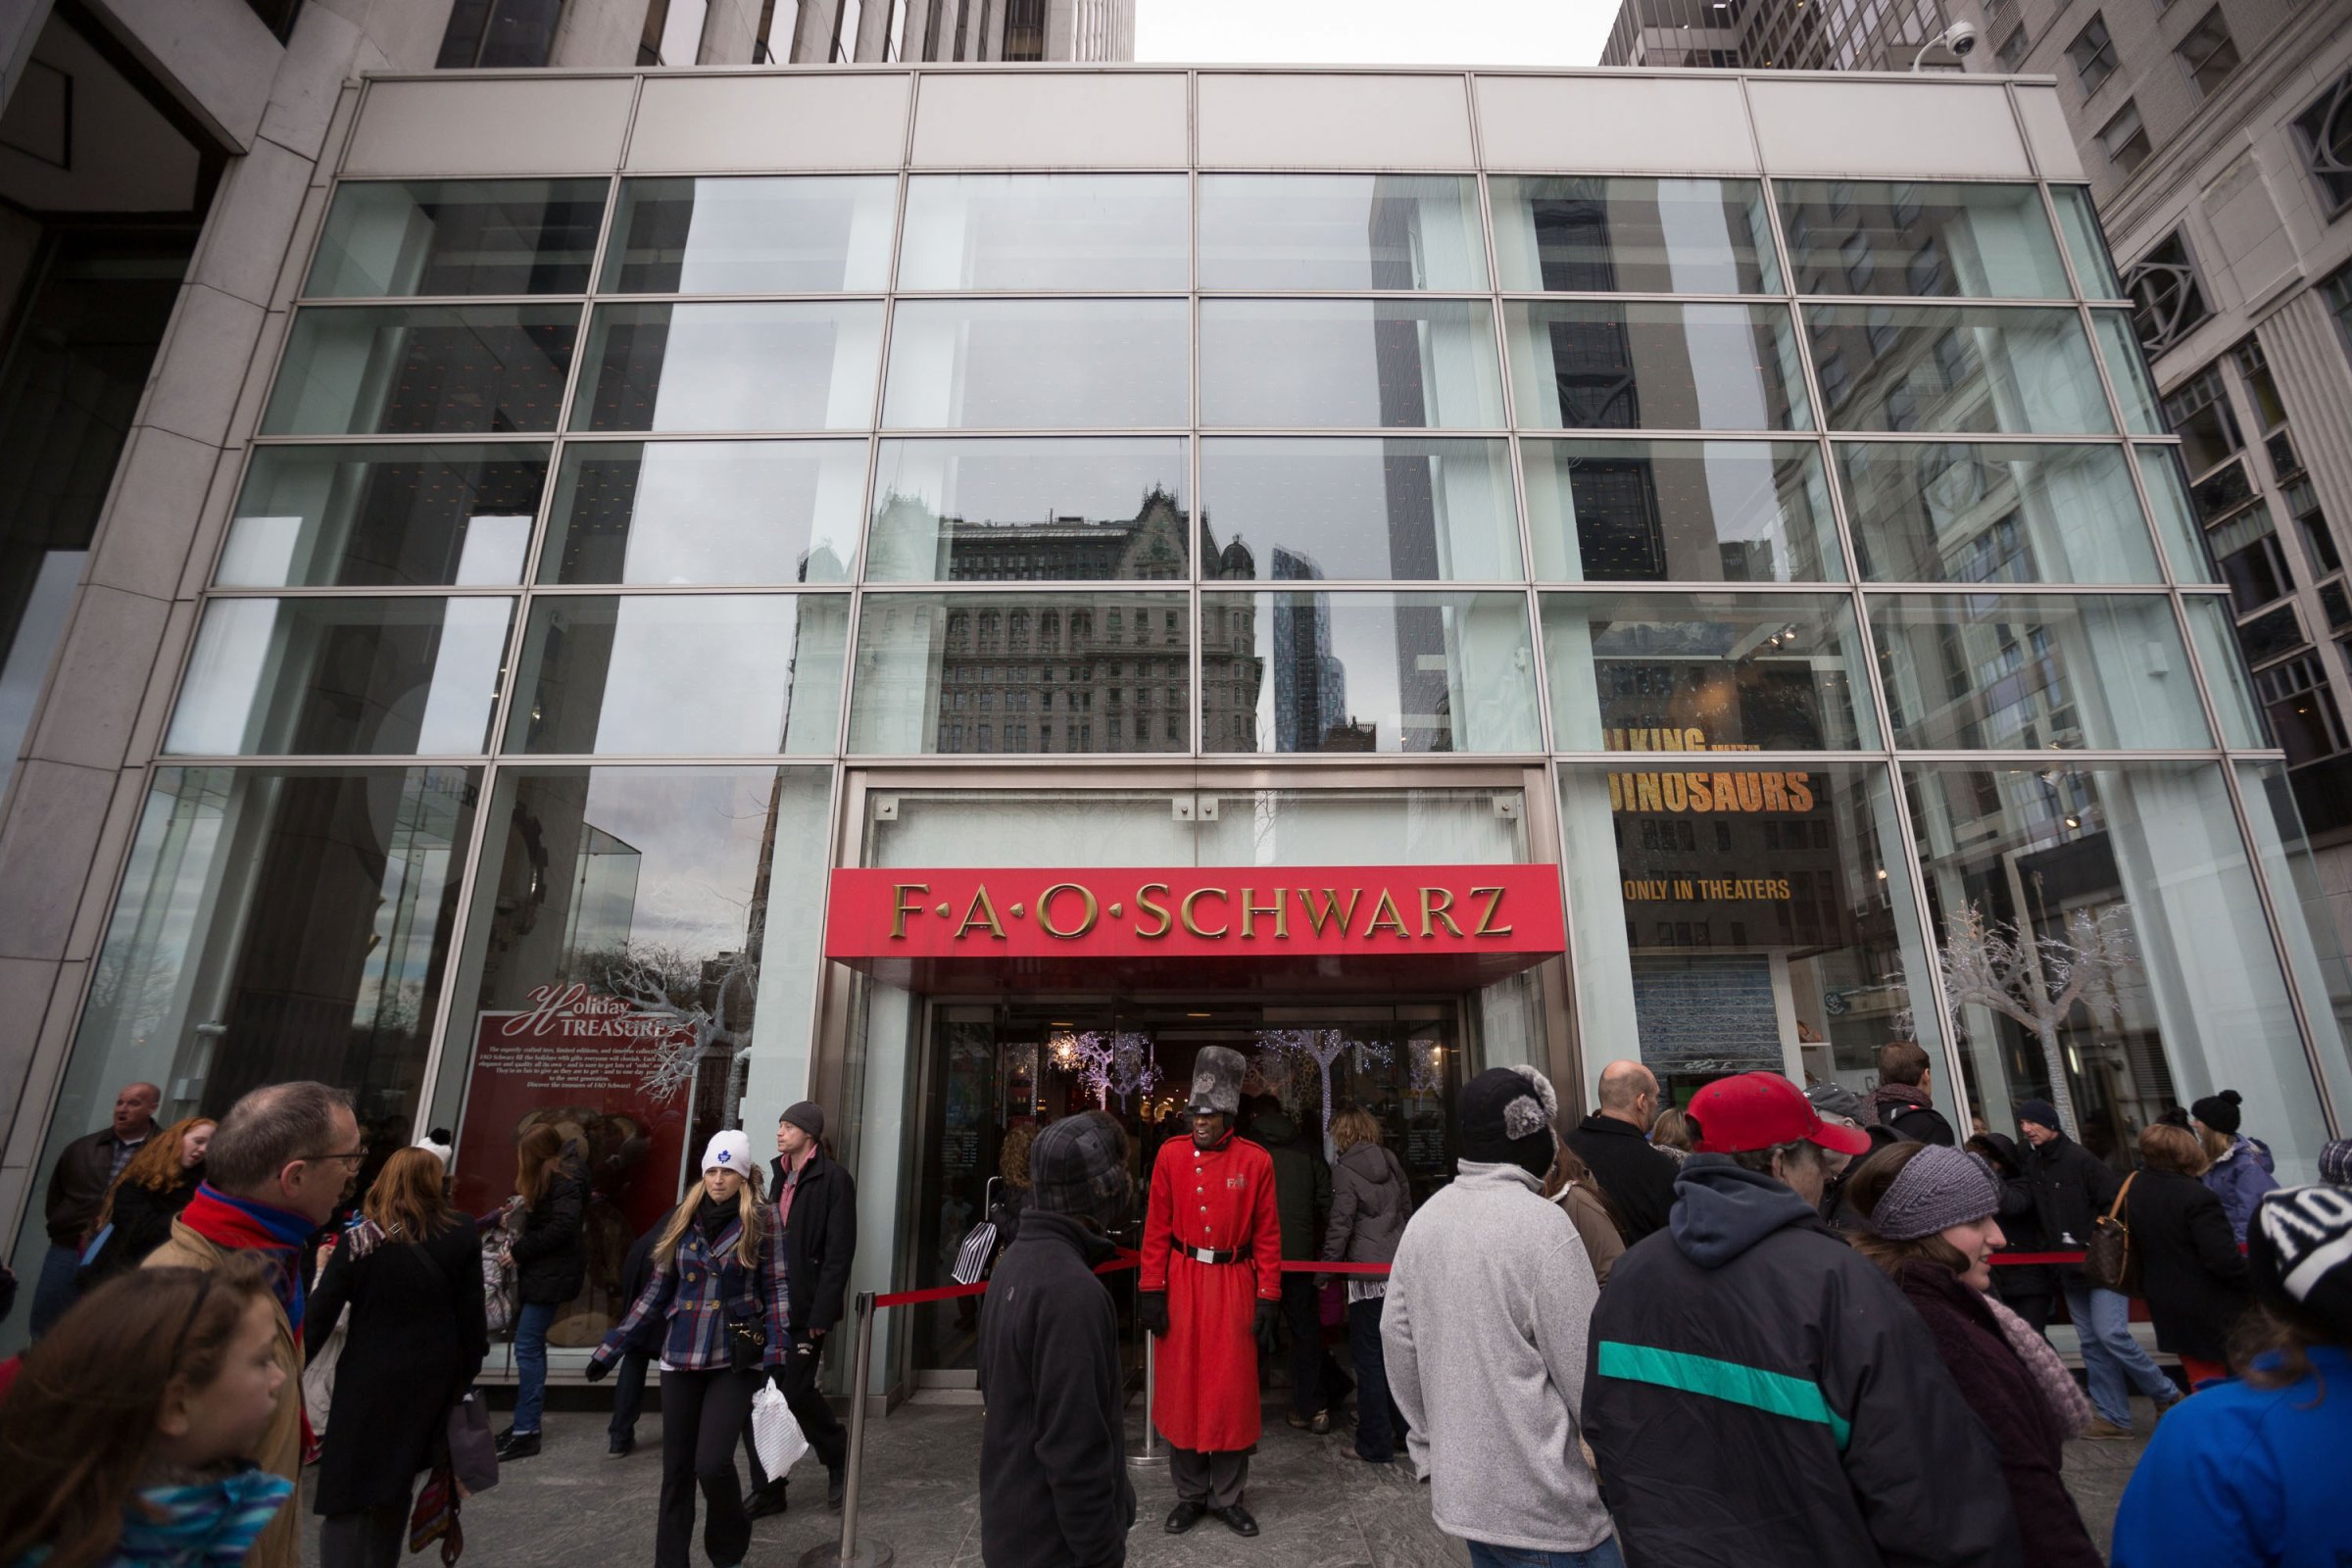 A general view of the exterior facade of FAO Schwarz flagship Toy store in the General Motors Building at Fifth Avenue and 58th Street on December 30, 2013 in New York City.